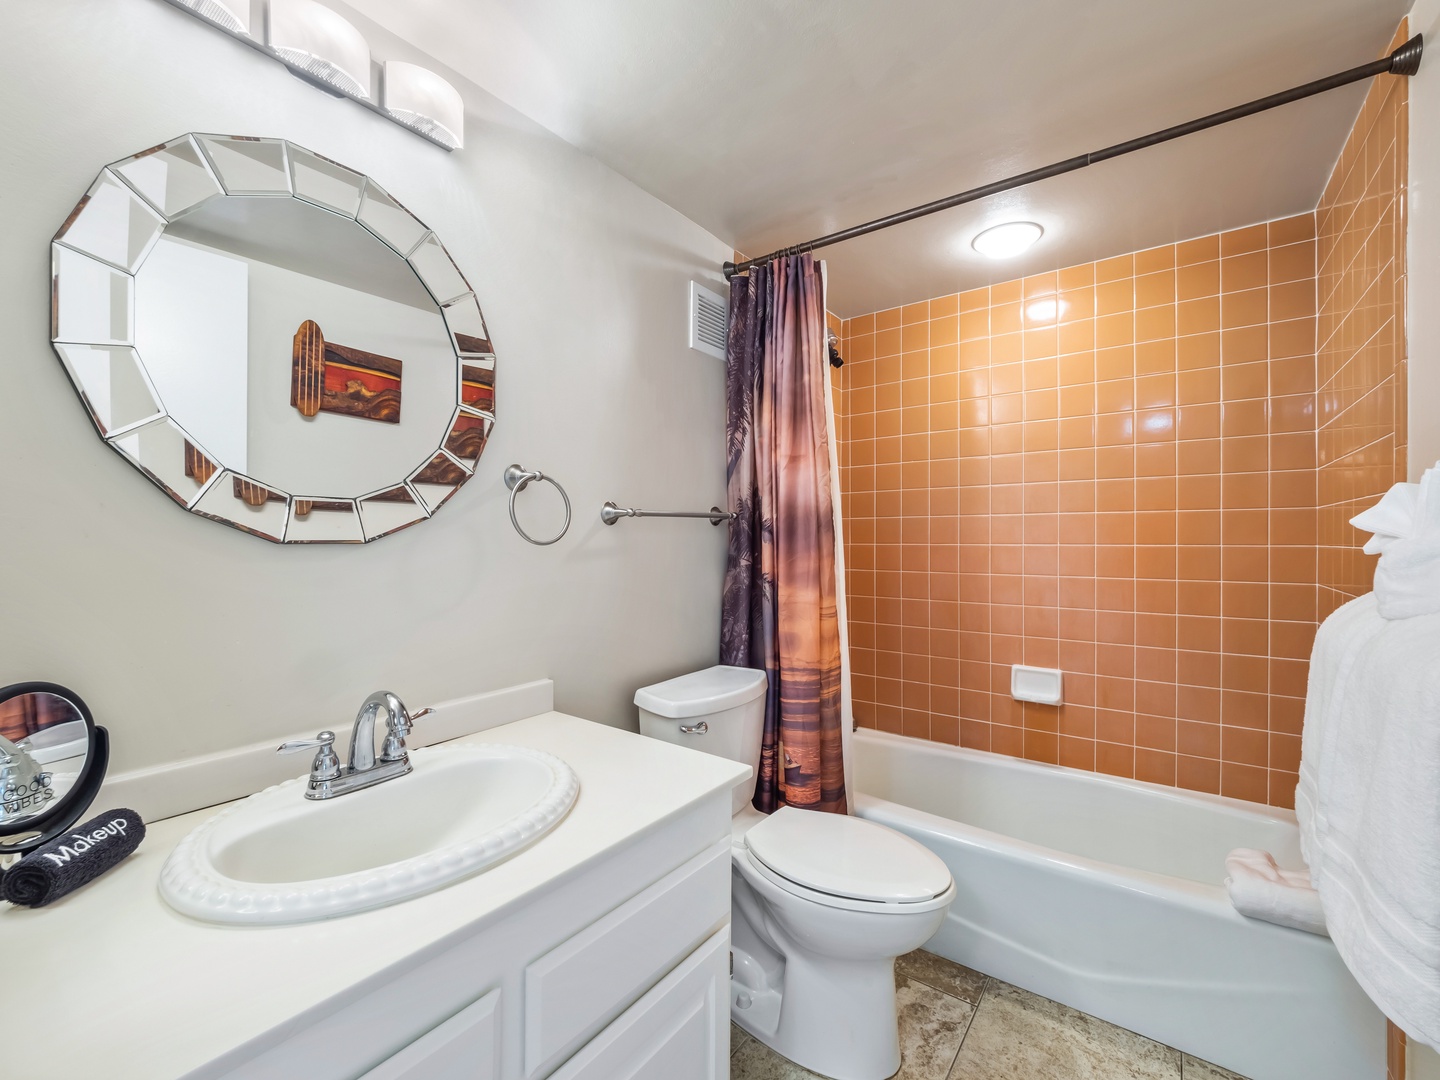 Shared bathroom with shower/tub combo